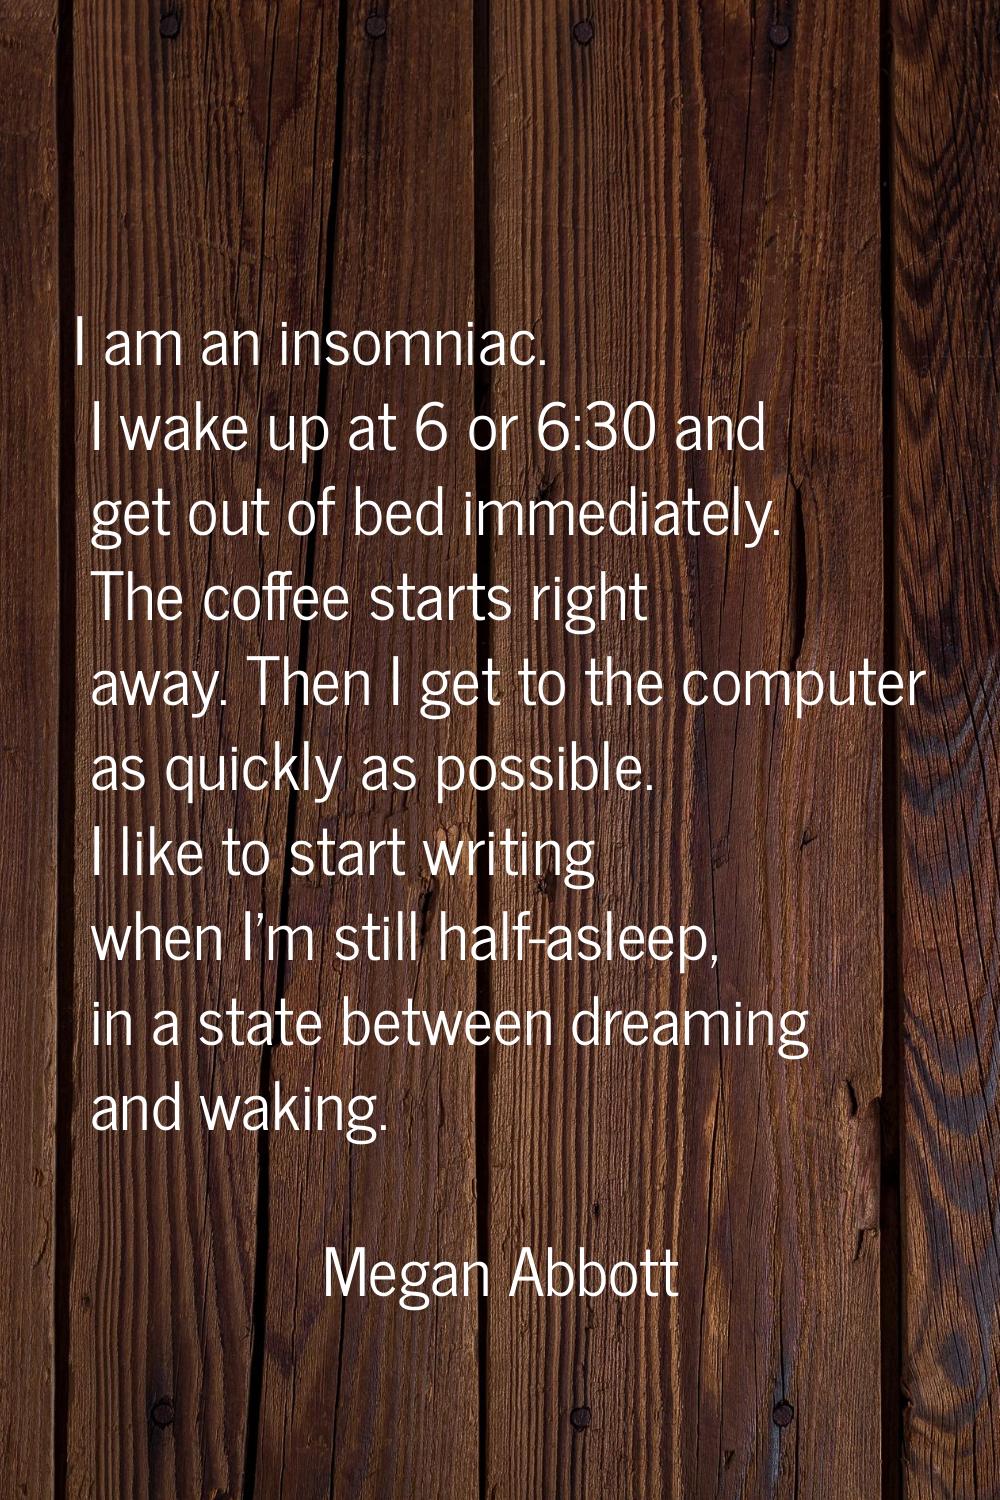 I am an insomniac. I wake up at 6 or 6:30 and get out of bed immediately. The coffee starts right a